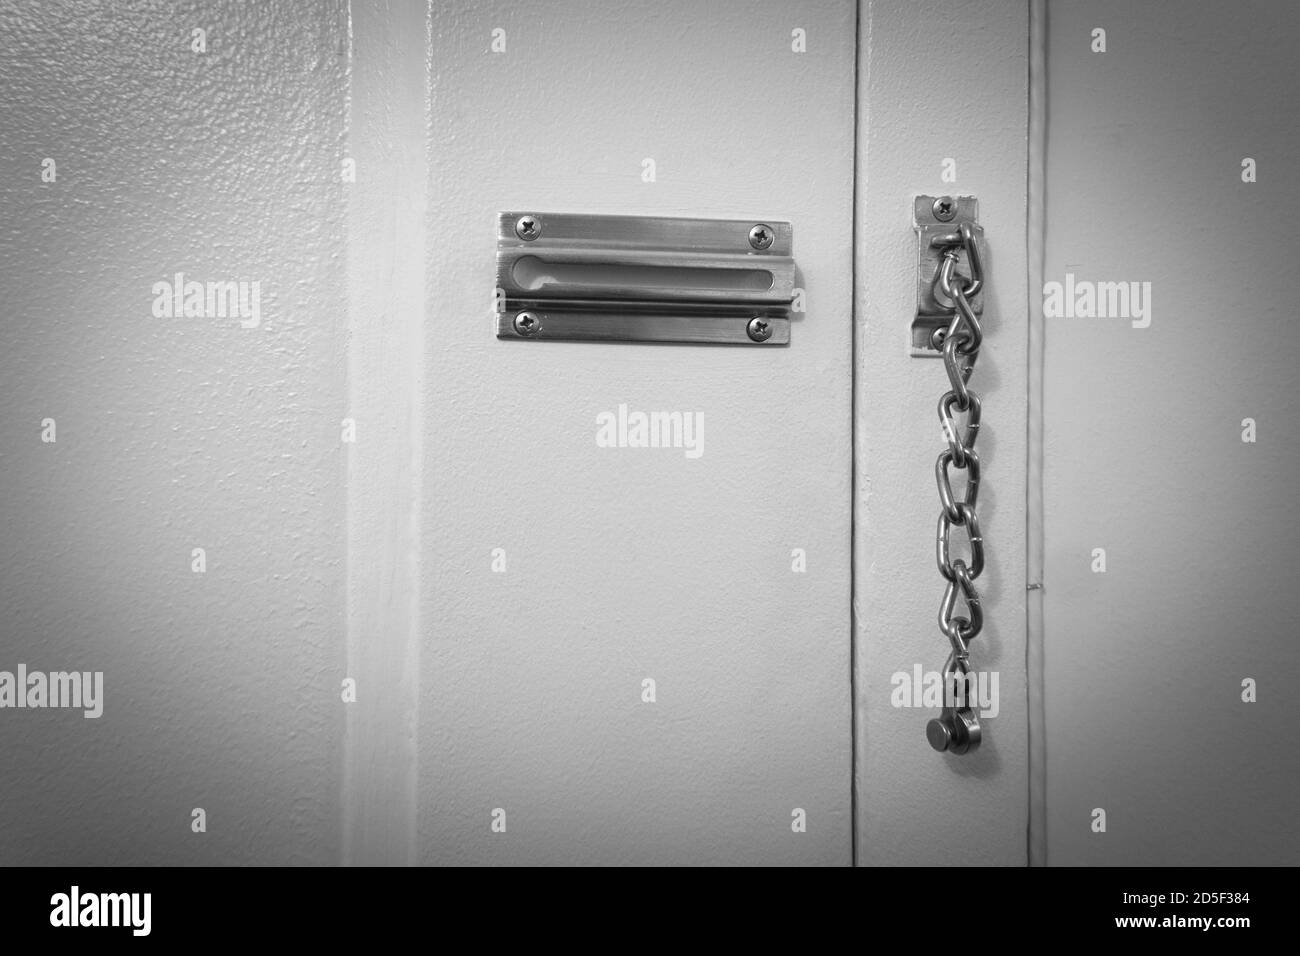 Door chain attached to a white door as a security measures Stock Photo